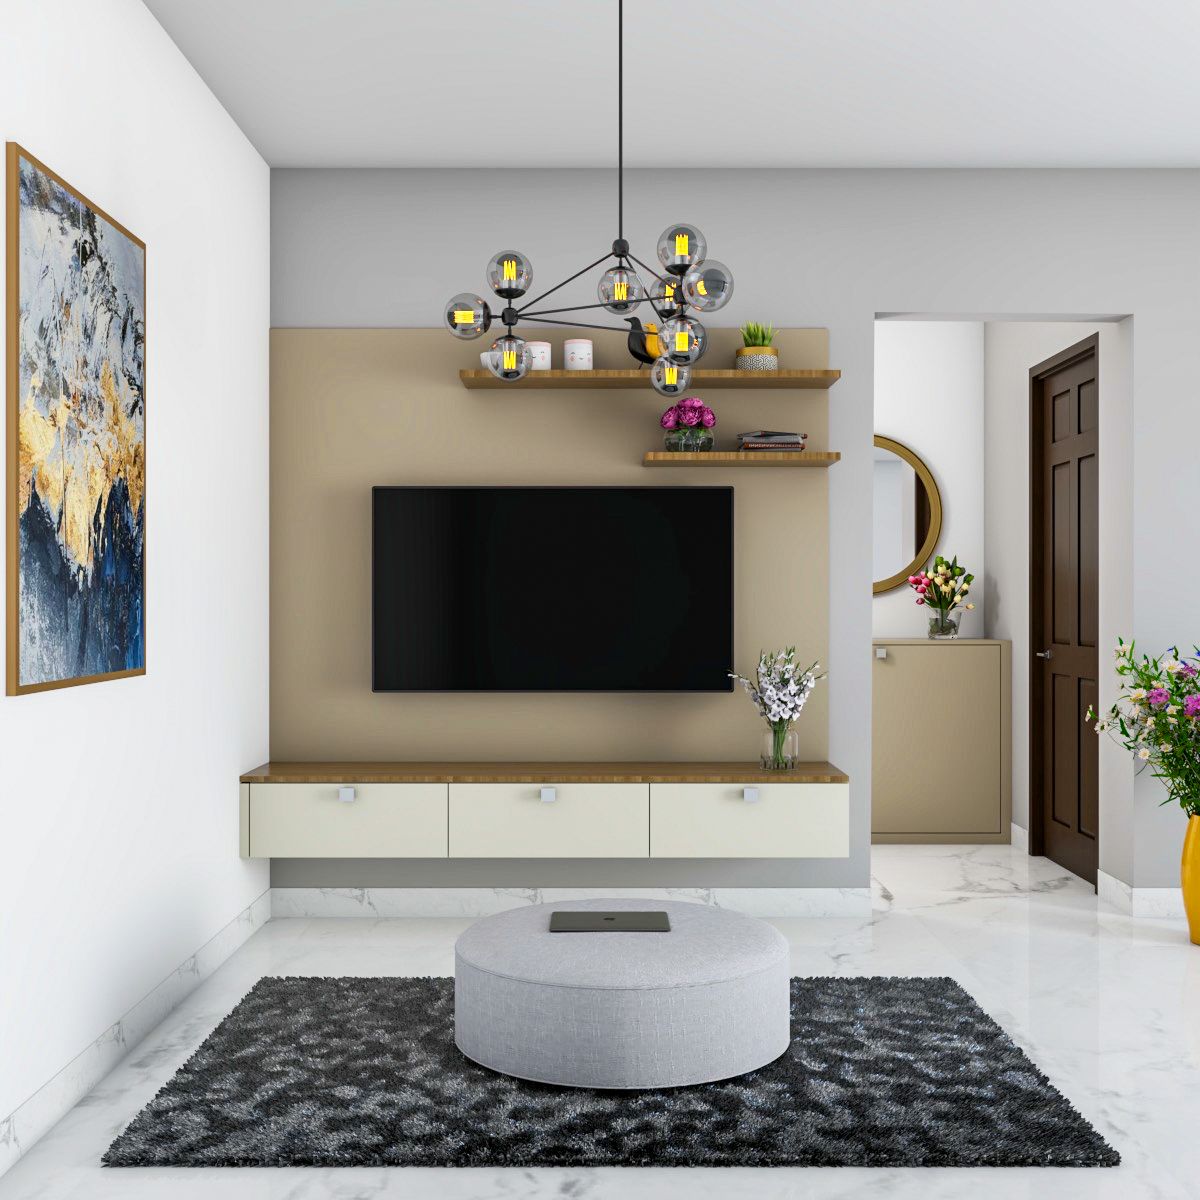 Modern Beige TV Unit with Wooden Ledges and Drop Light